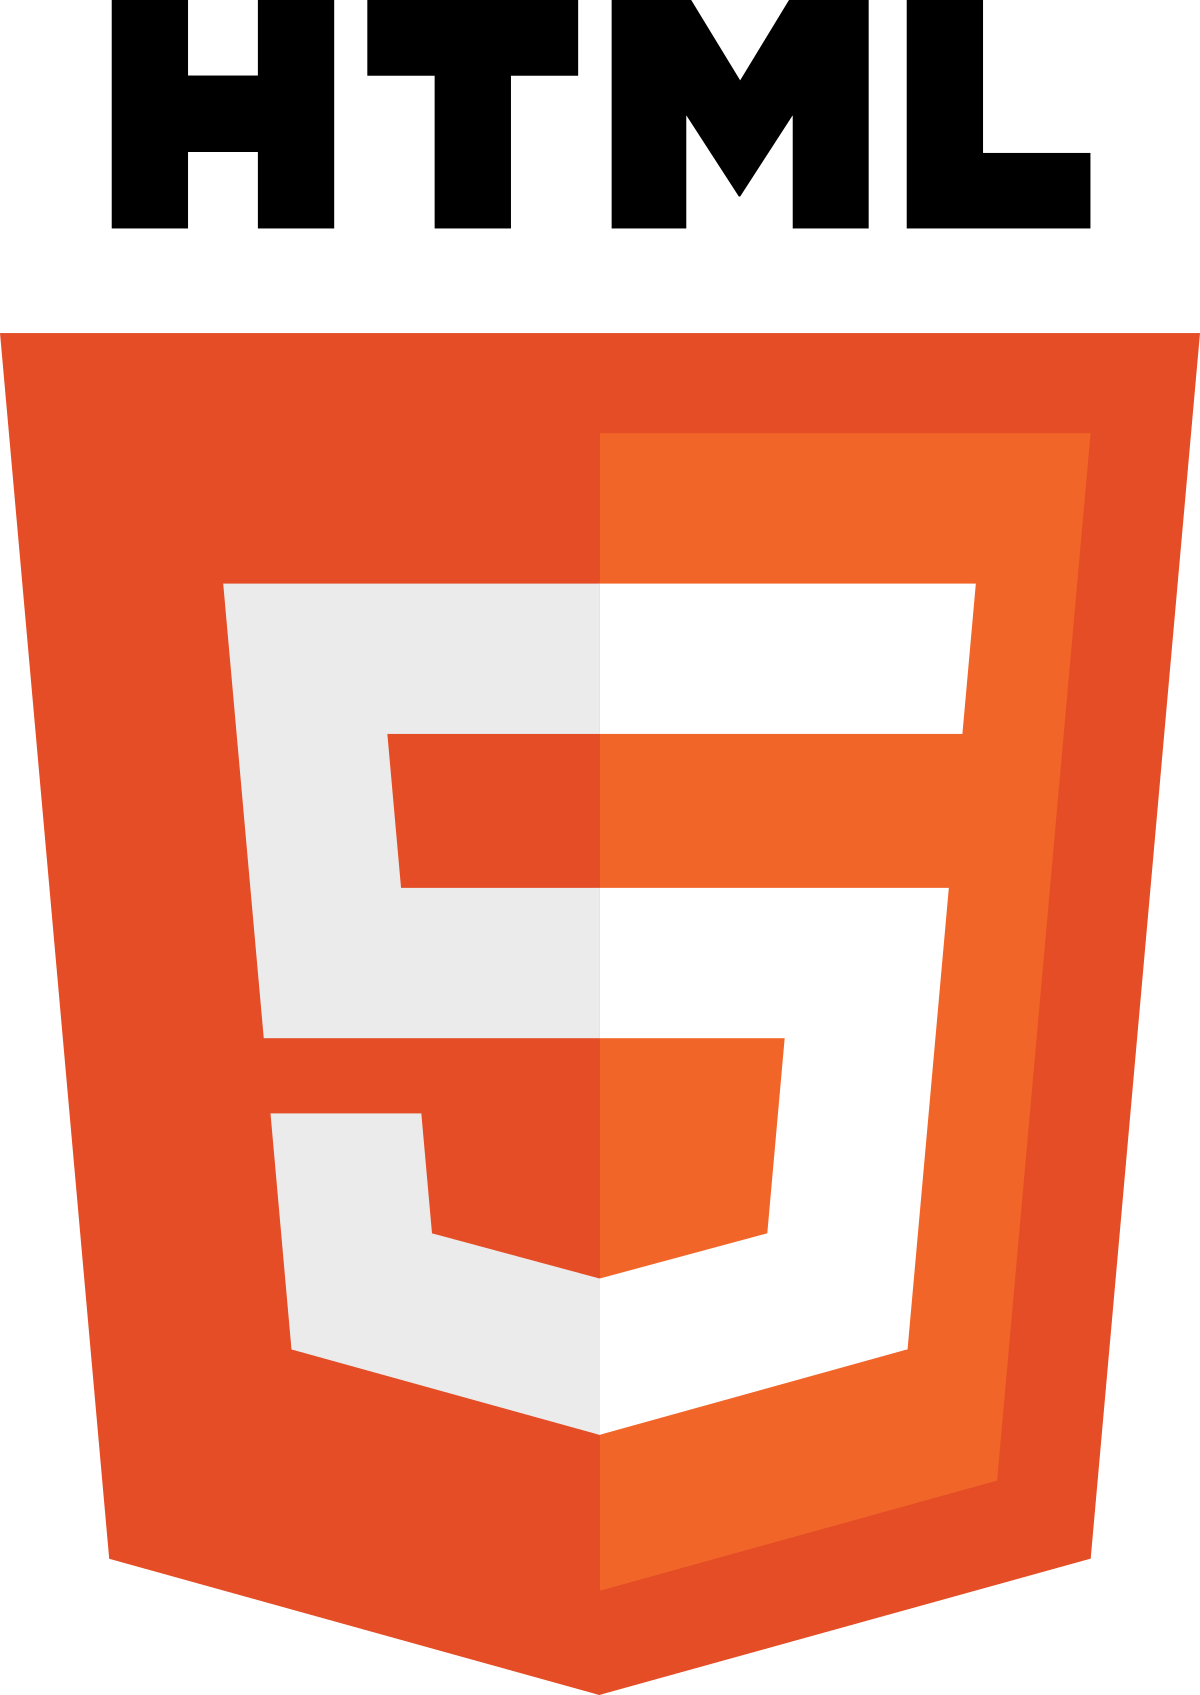 Symphysis Marketing has Developers who know HTML 5 for small businesses